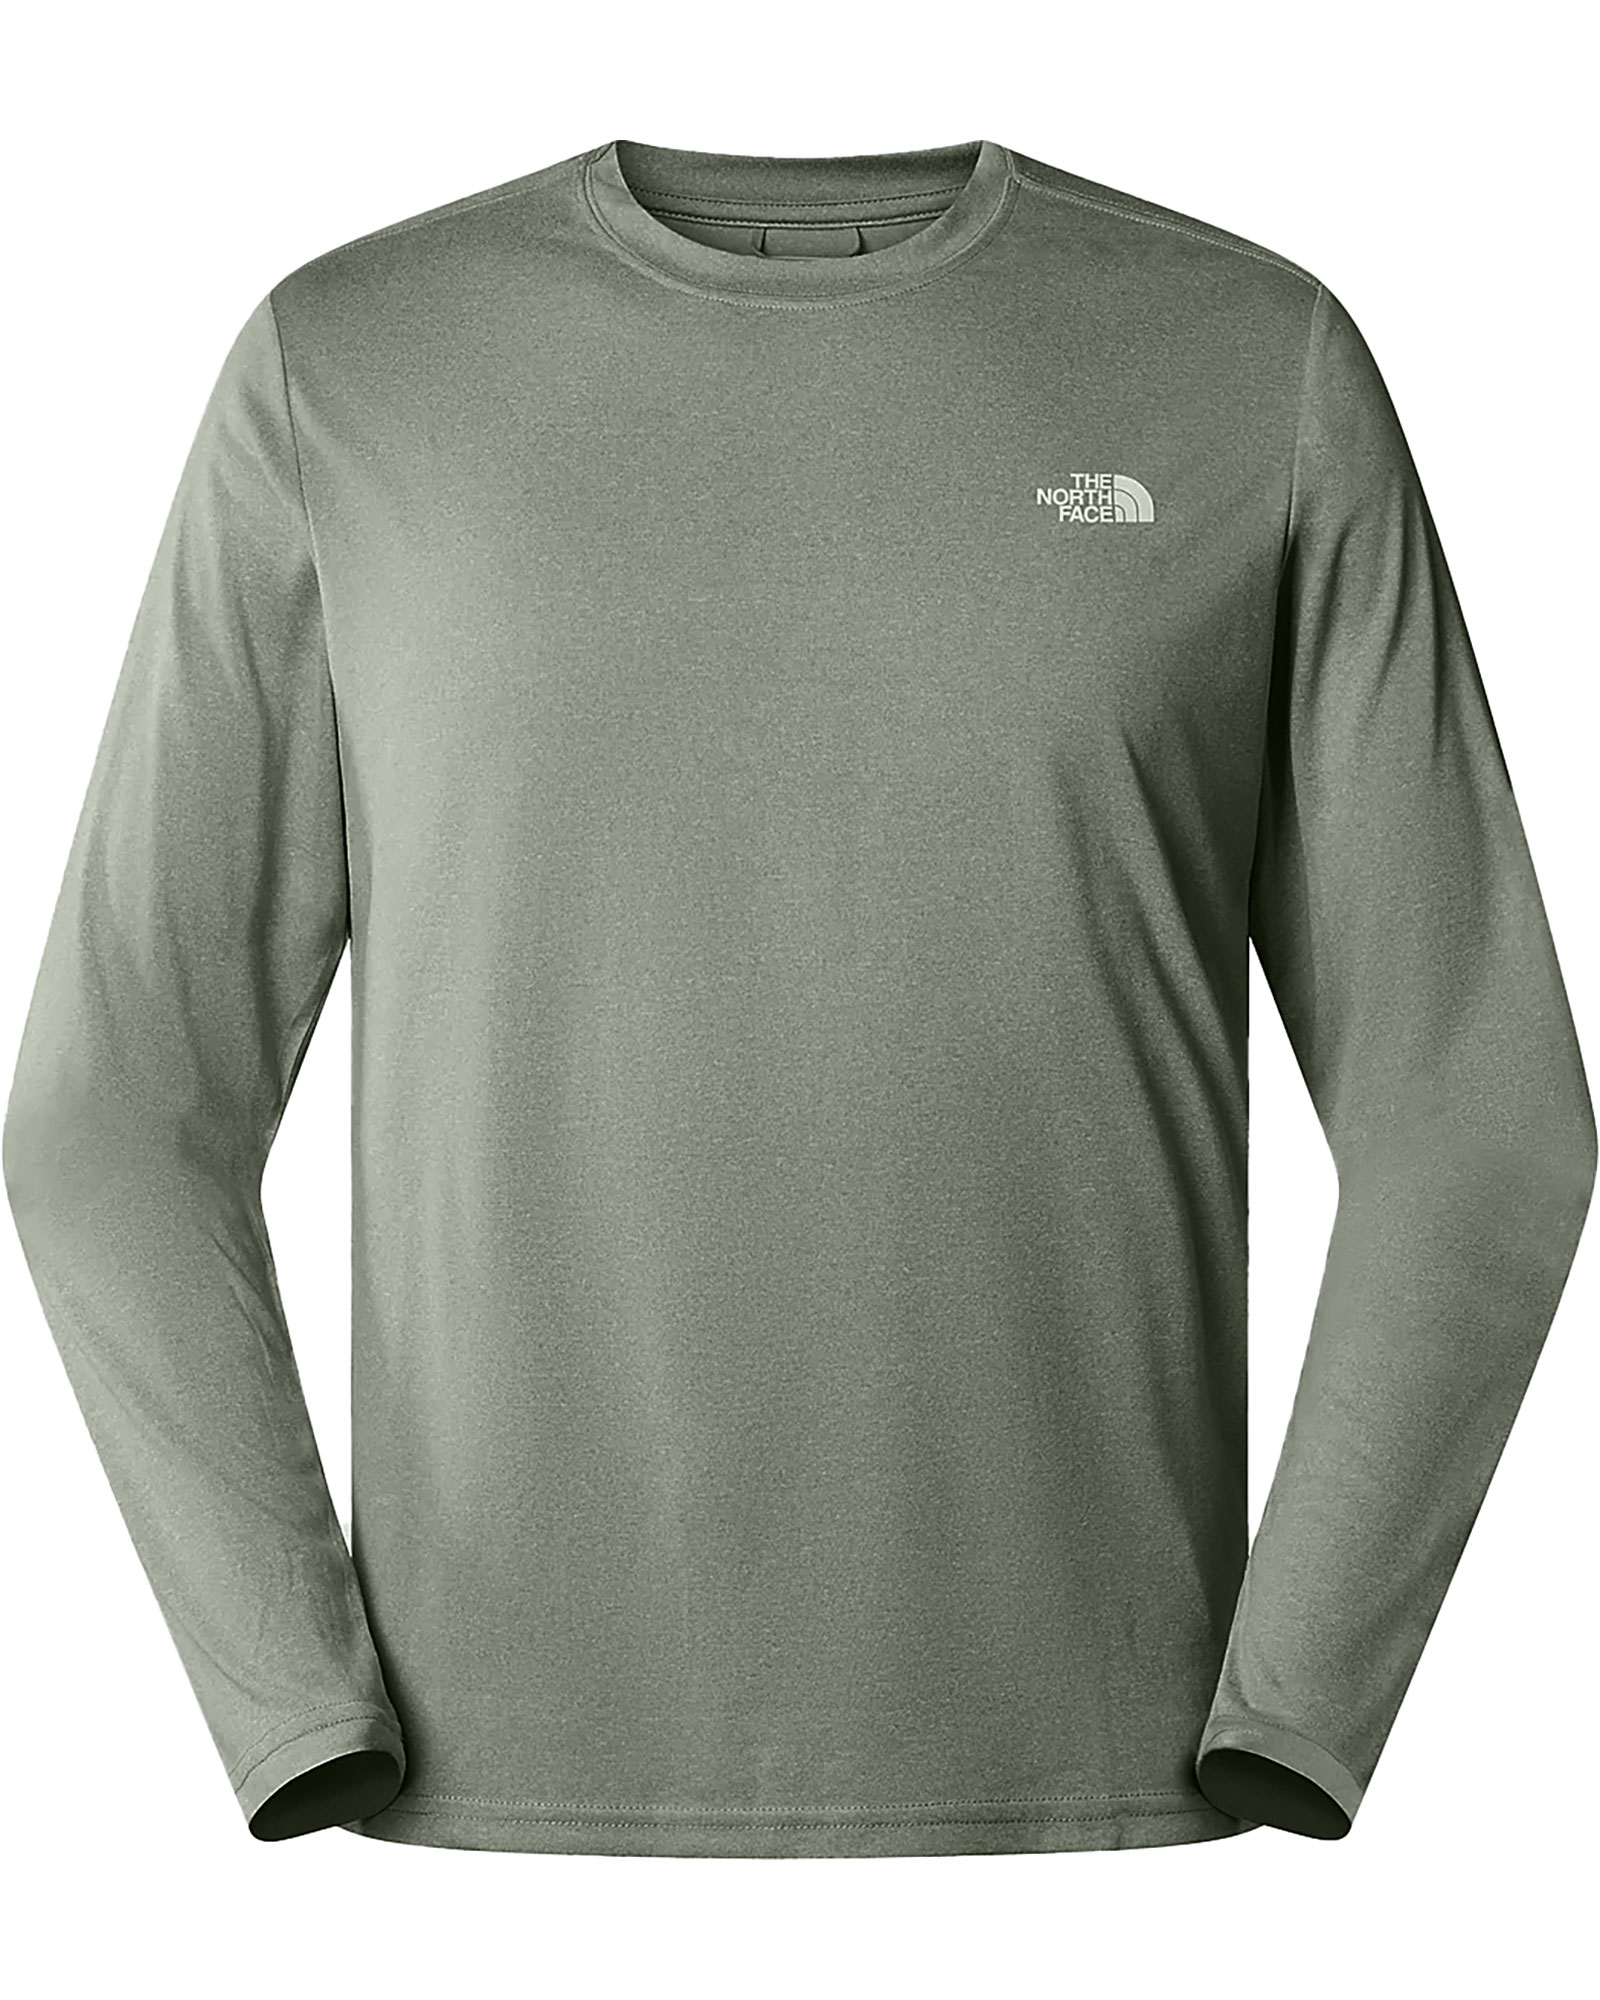 The North Face Men’s Reaxion Amp Long Sleeved Crew T Shirt - New Taupe Green Heather S